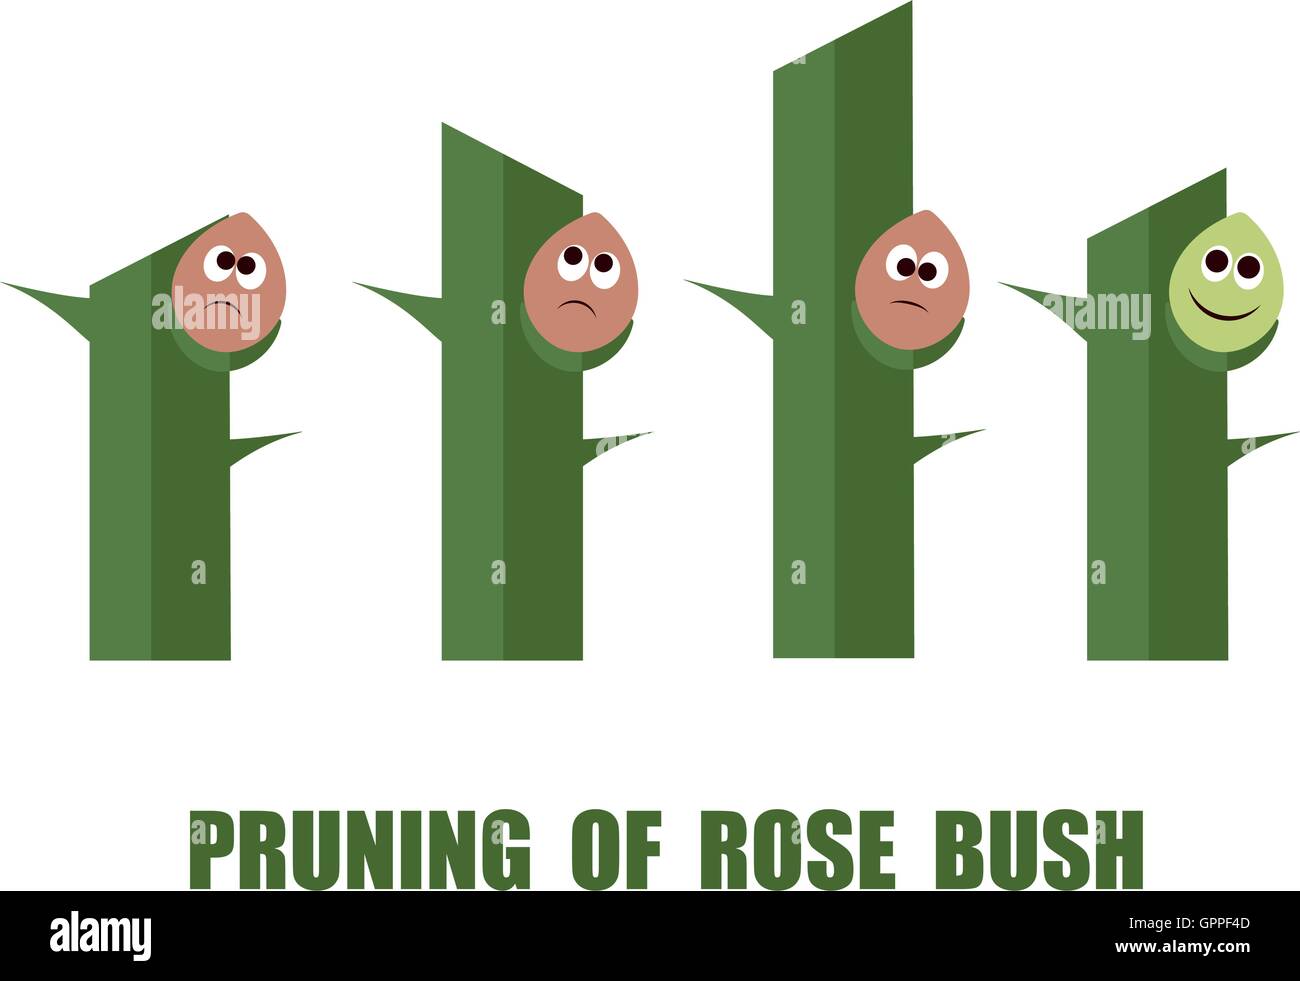 Correct and wrong ways to prune rose bushes Stock Vector